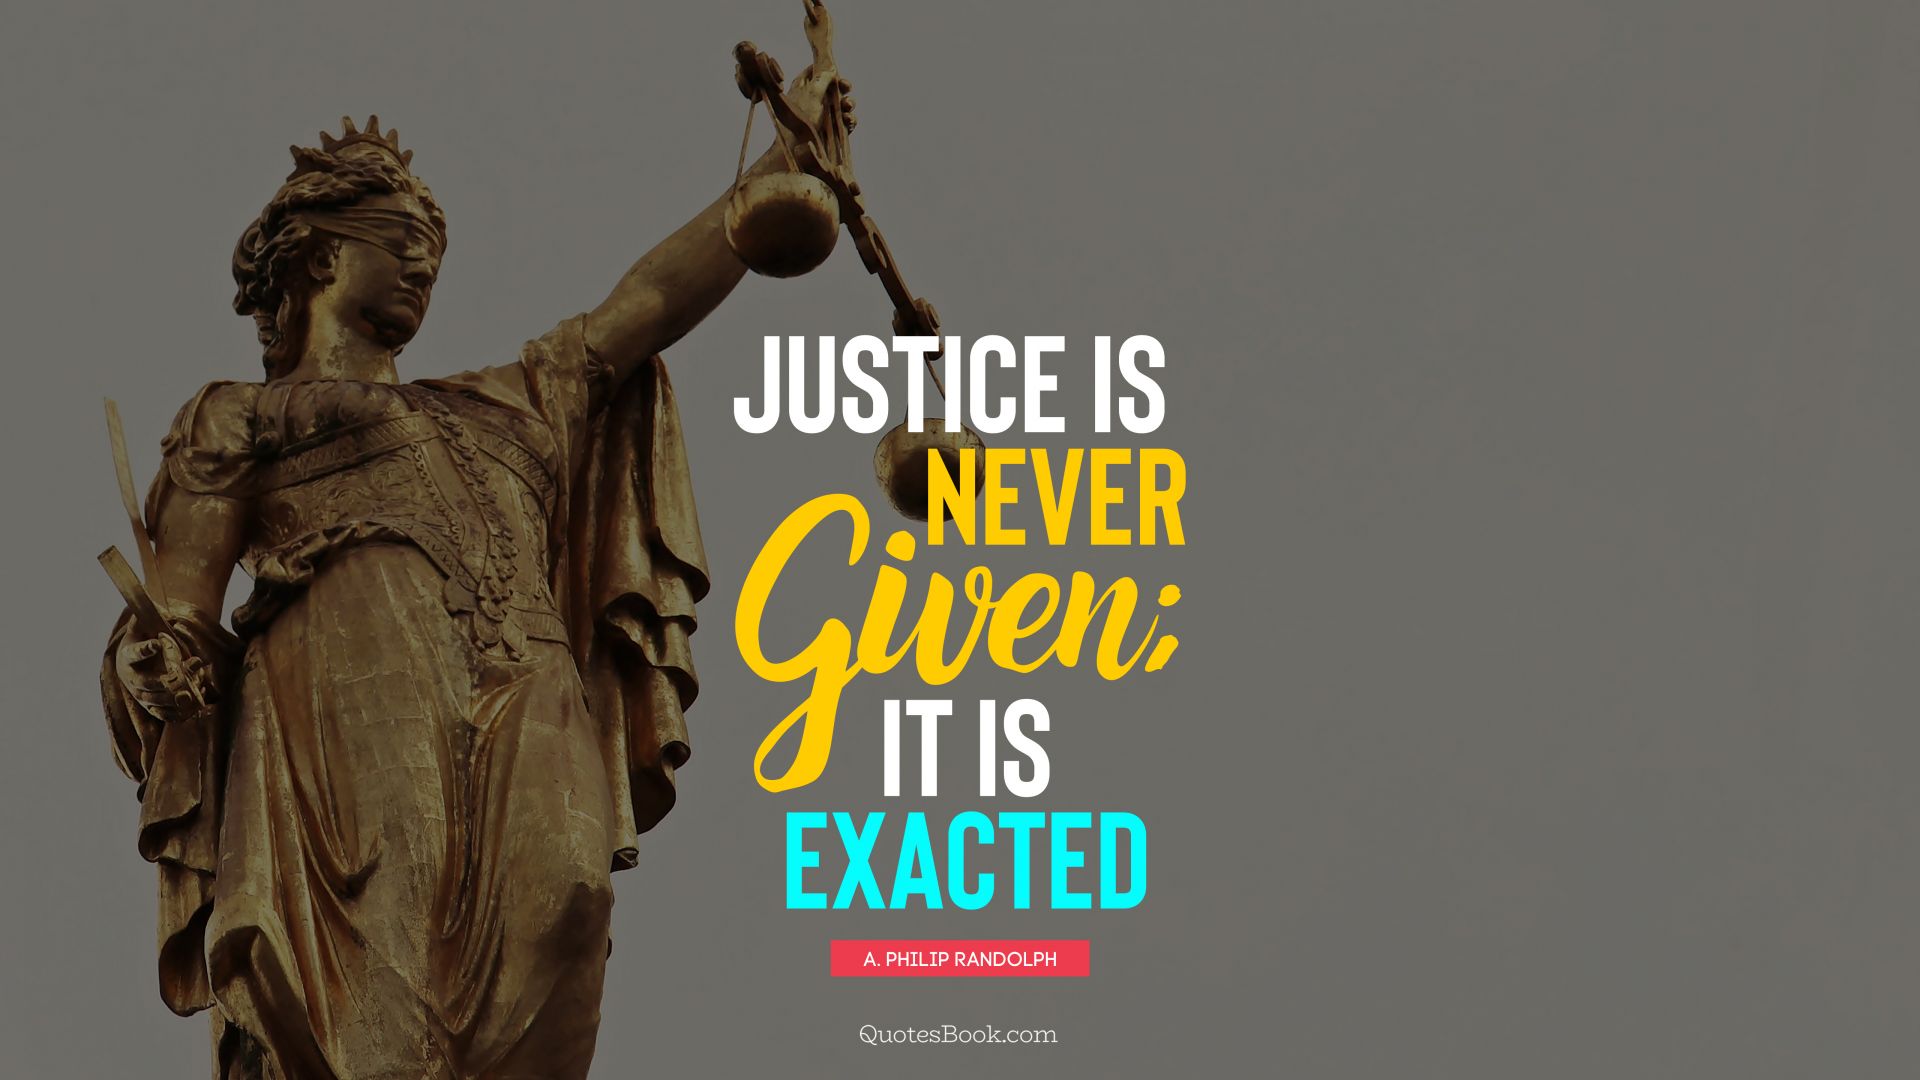 Justice is never given; it is exacted. - Quote by A. Philip Randolph